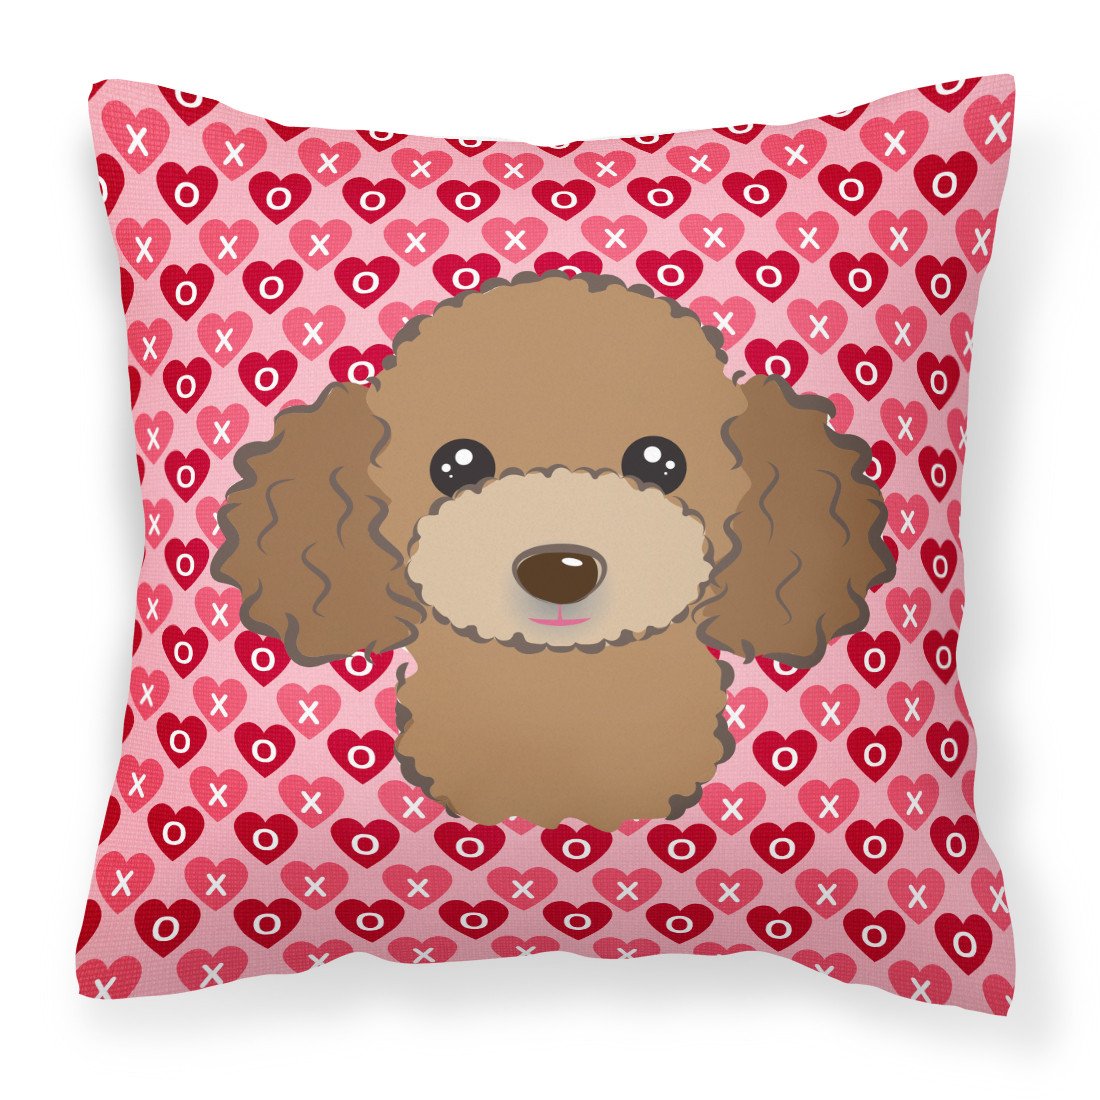 Chocolate Brown Poodle Hearts Fabric Decorative Pillow BB5326PW1818 by Caroline's Treasures